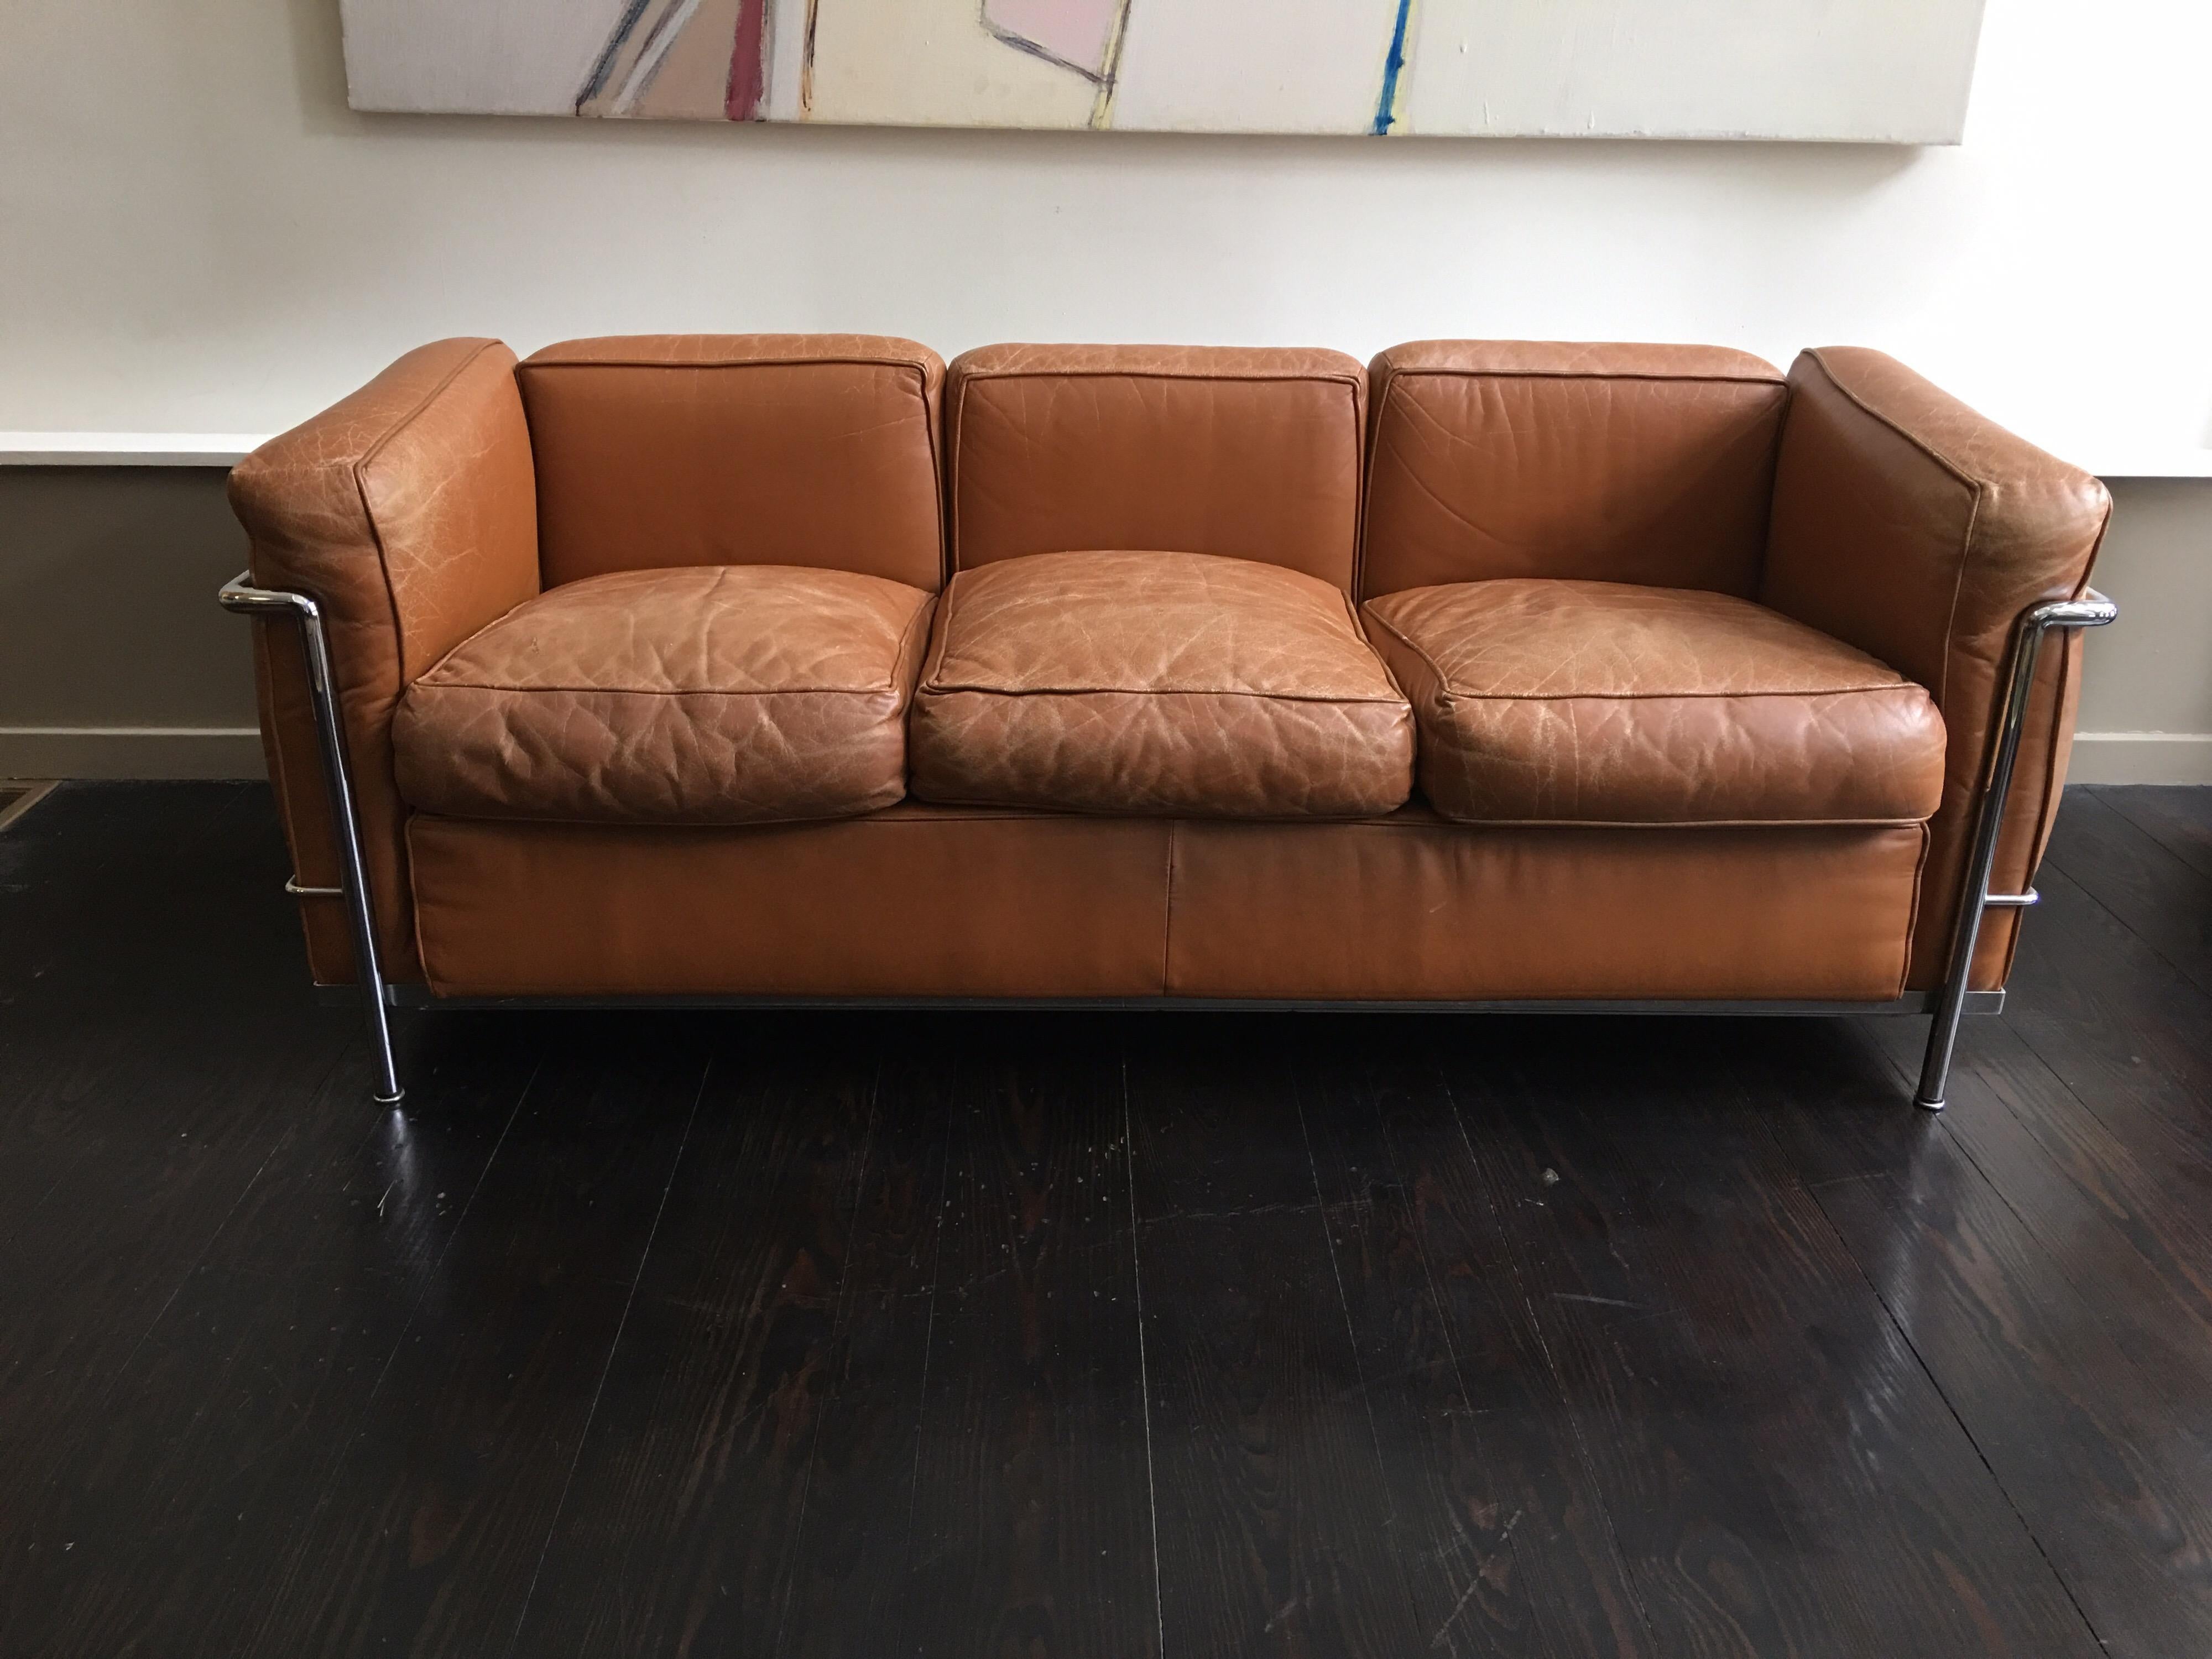 Le Corbusier for Cassina LC2 three-seat sofa. 2 available! These were purchased by architects for their home in 1972 Tan leather with chrome frame. Perfect amount of patina to the leather cushions! Retains Cassina labels.